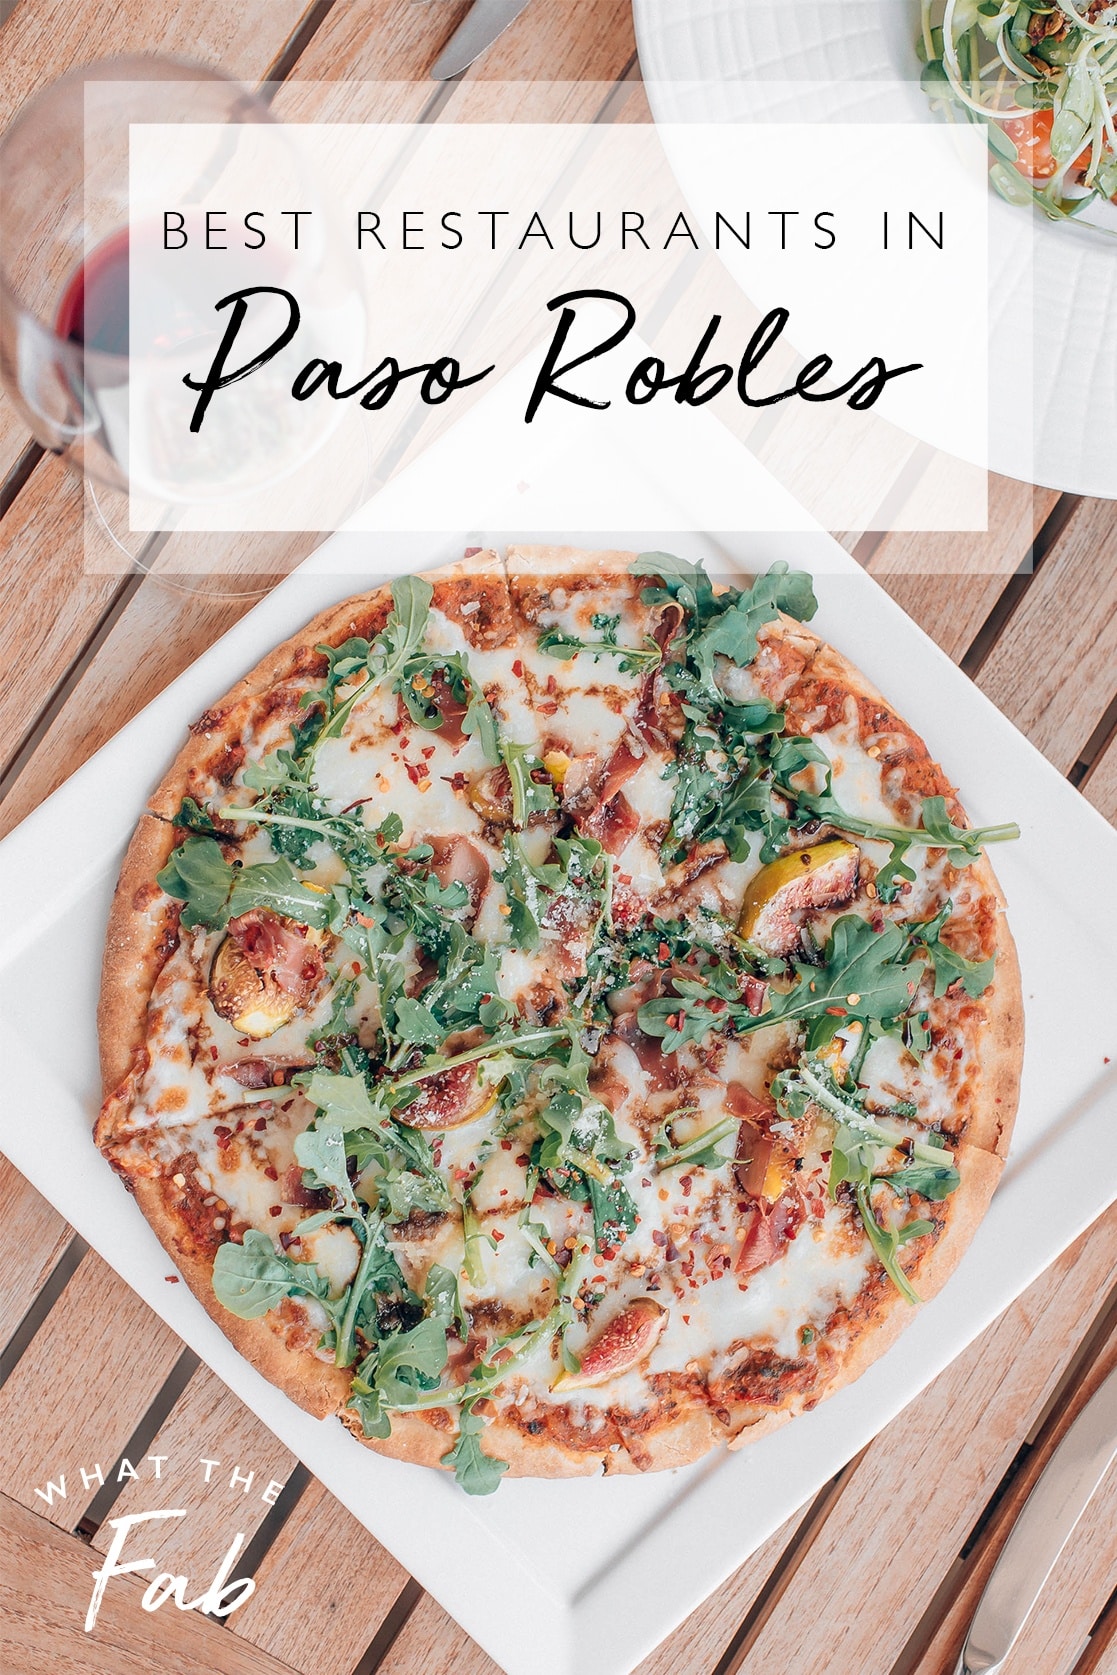 The best Paso Robles restaurants, by travel blogger What The Fab